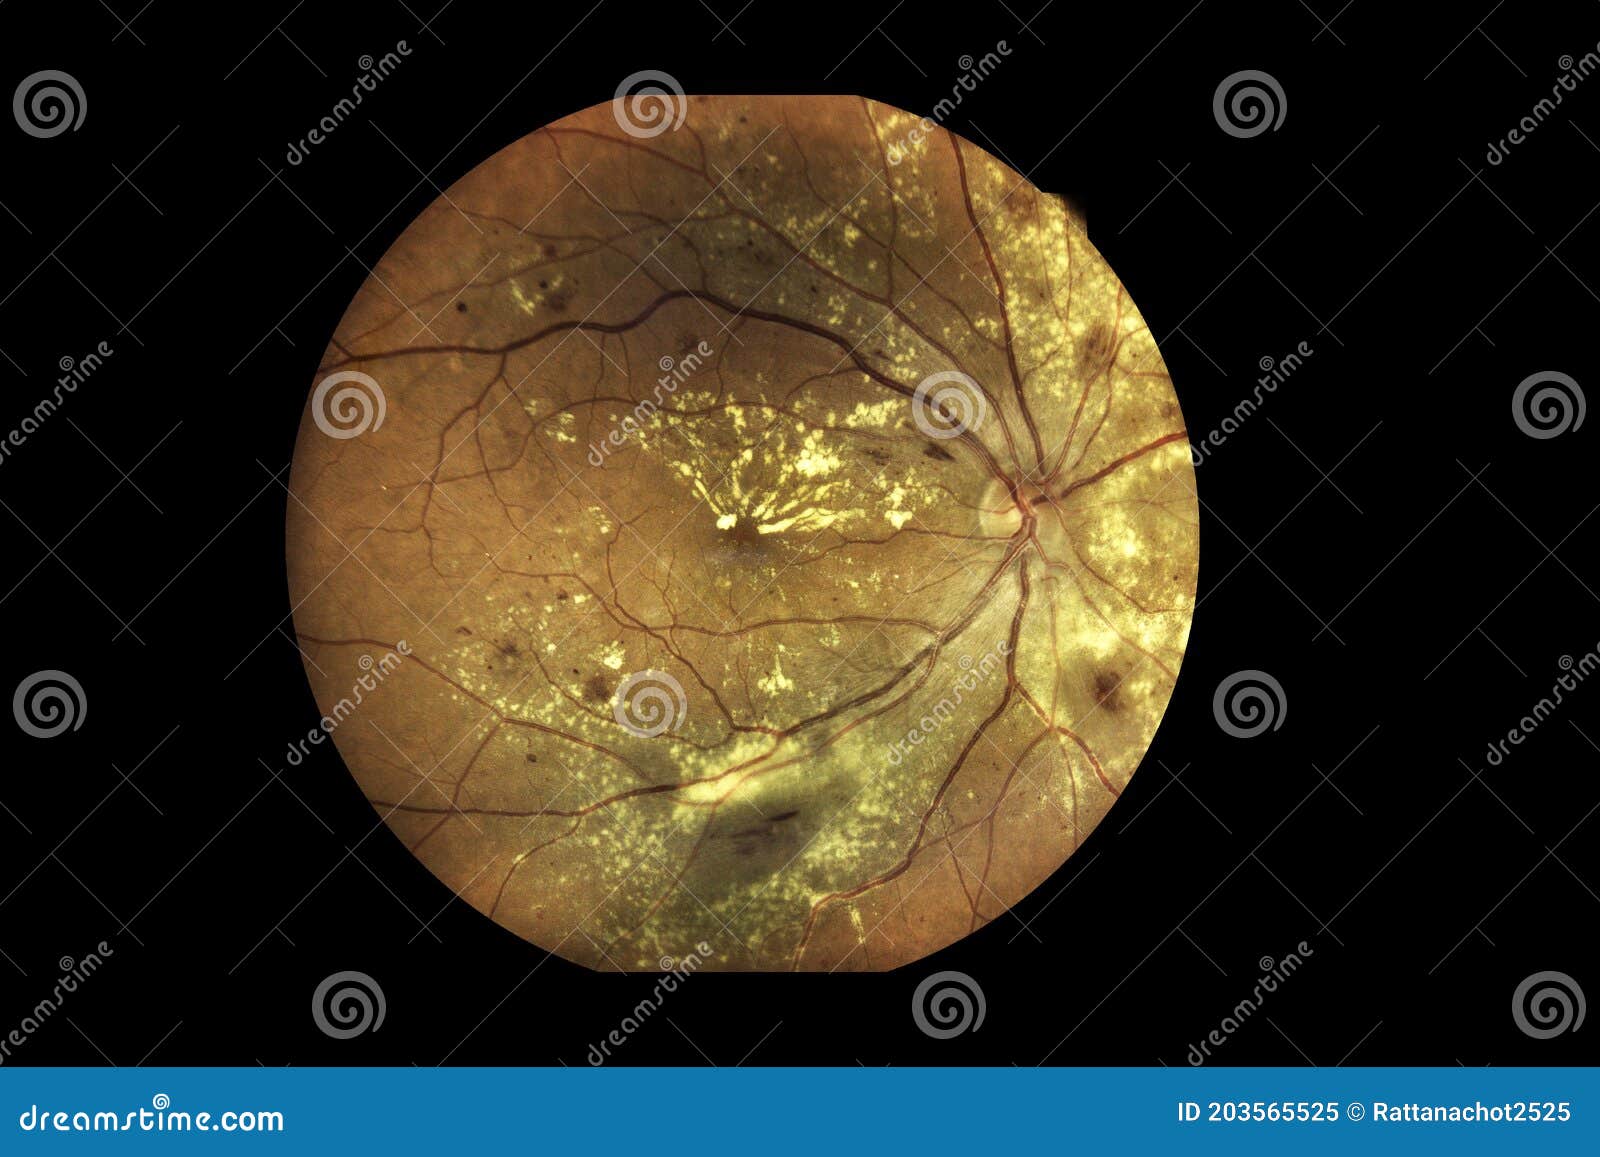 view inside human eye disorders showing retina, optic nerve and macula severe age-related macular degeneration